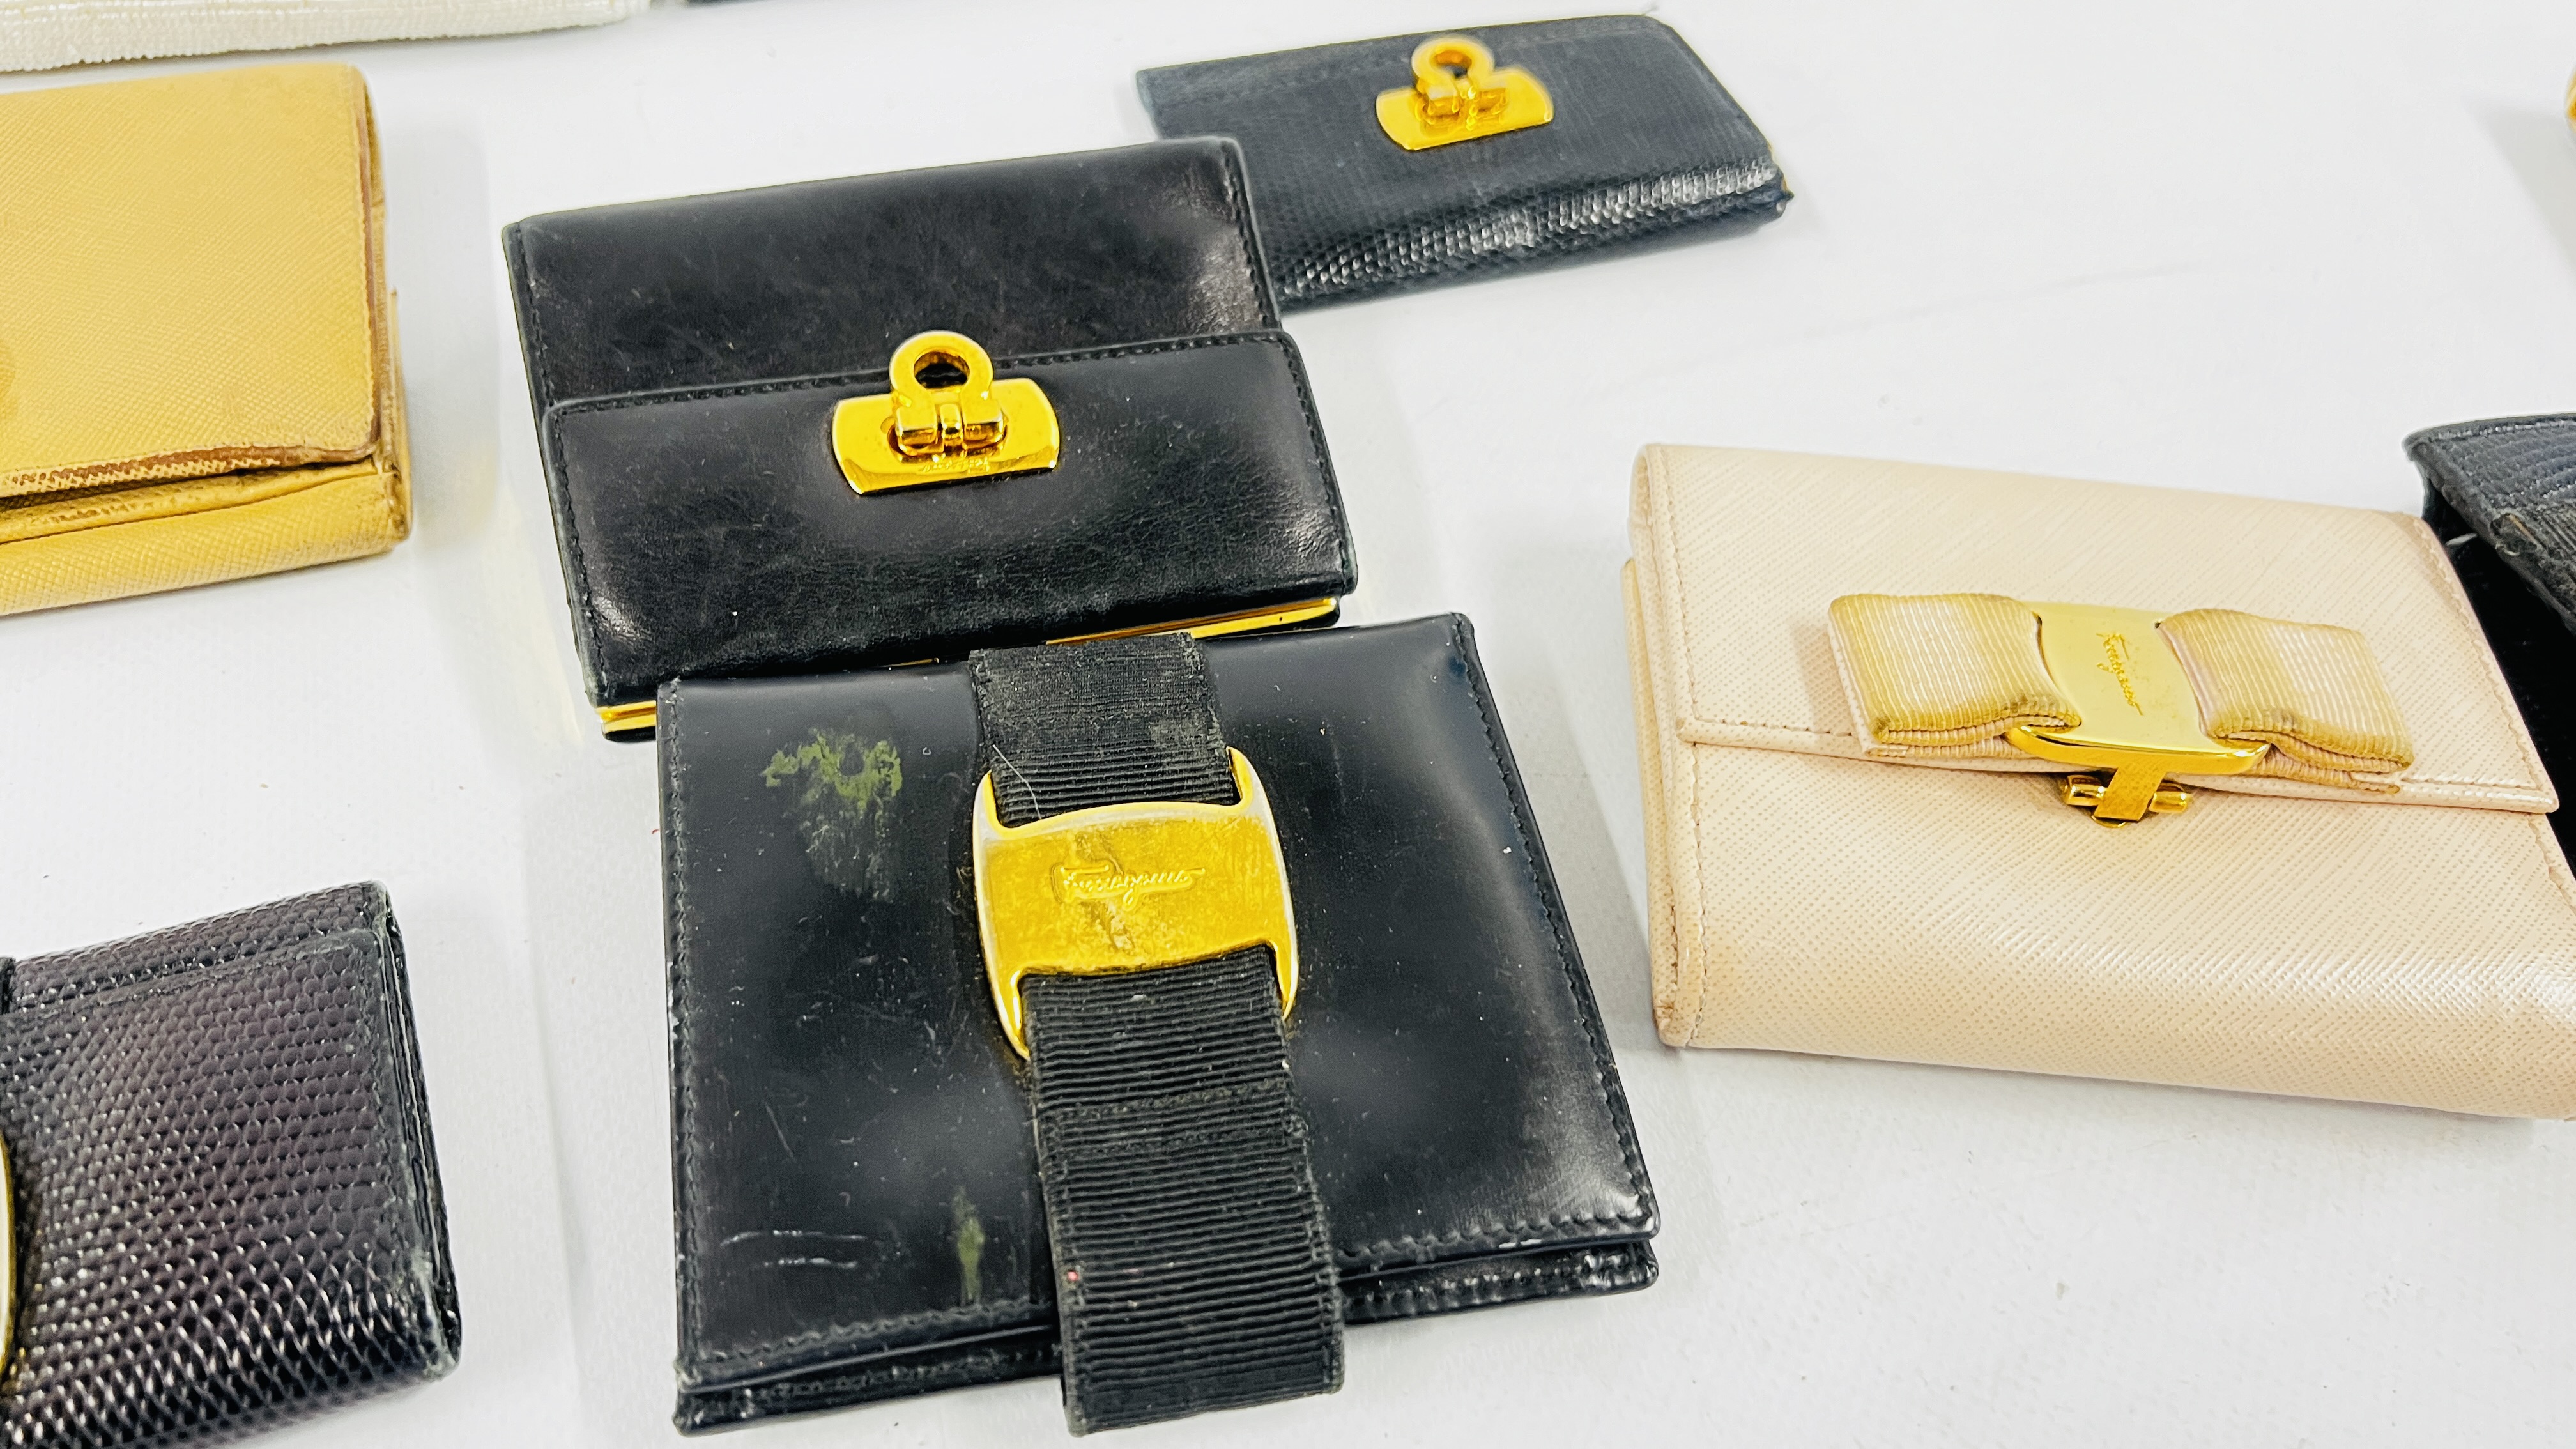 A COLLECTION OF 18 DESIGNER PURSES AND KEY HOLDERS MARKED "SALVADOR FERRAGAMA" + A FURTHER - Image 6 of 7